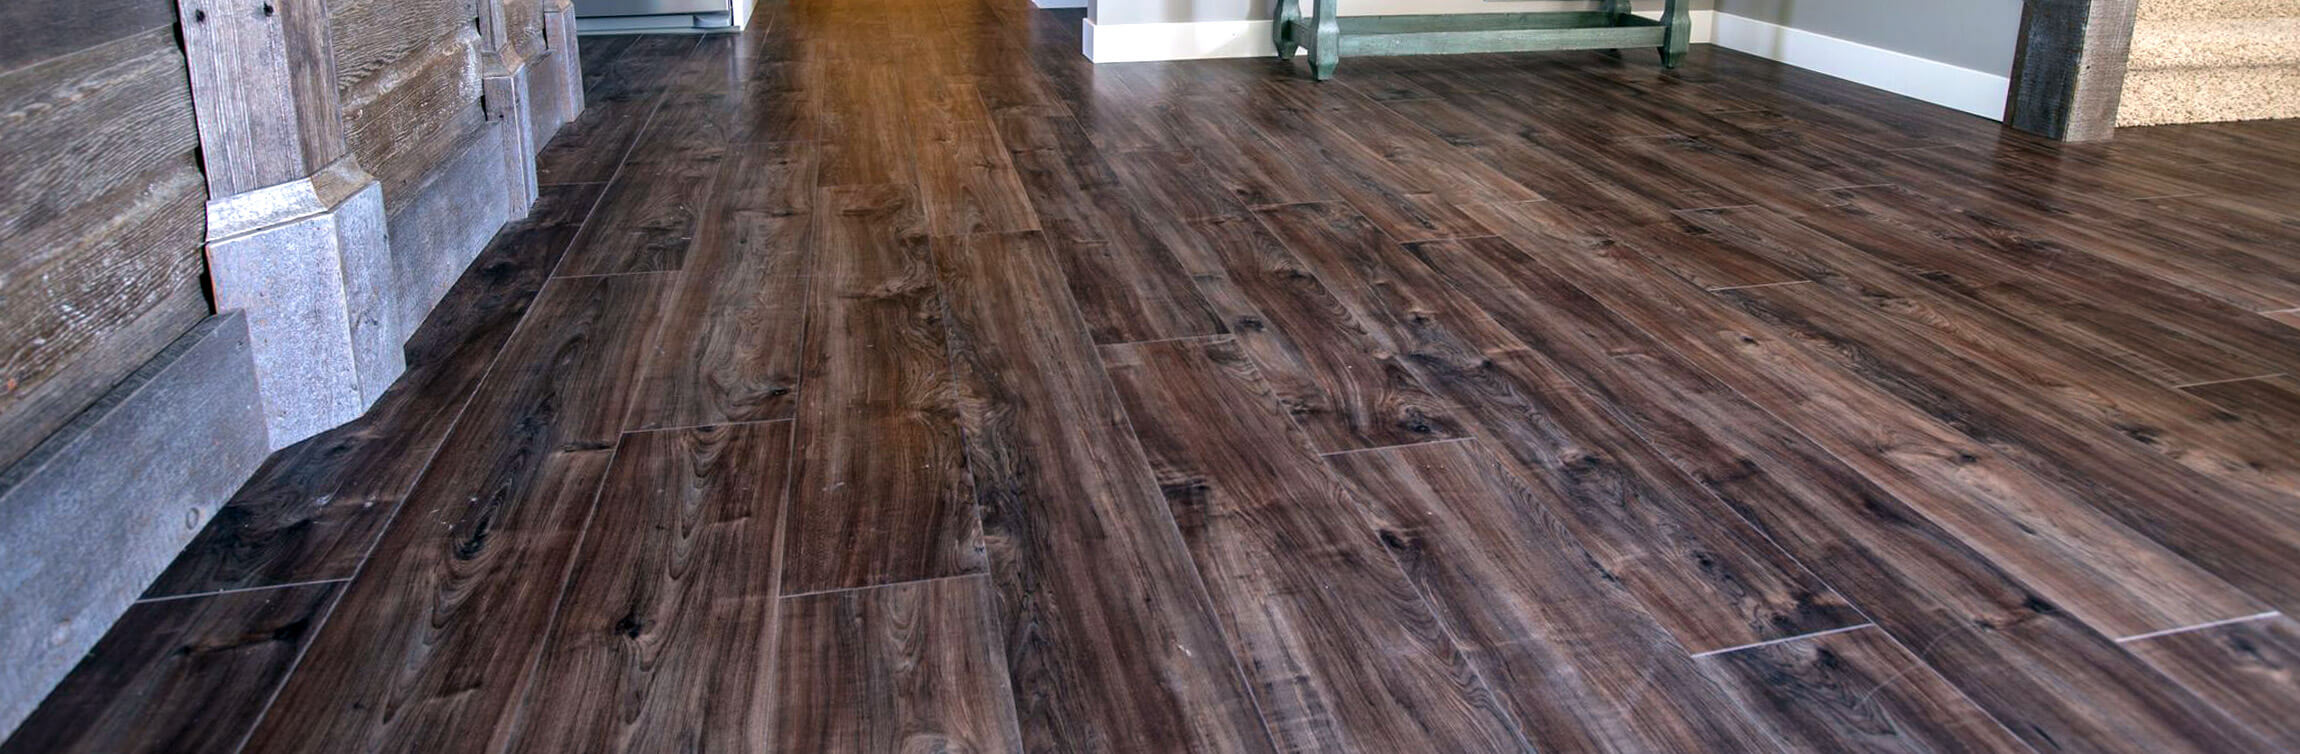 Custom stained and installed solid hardwood flooring